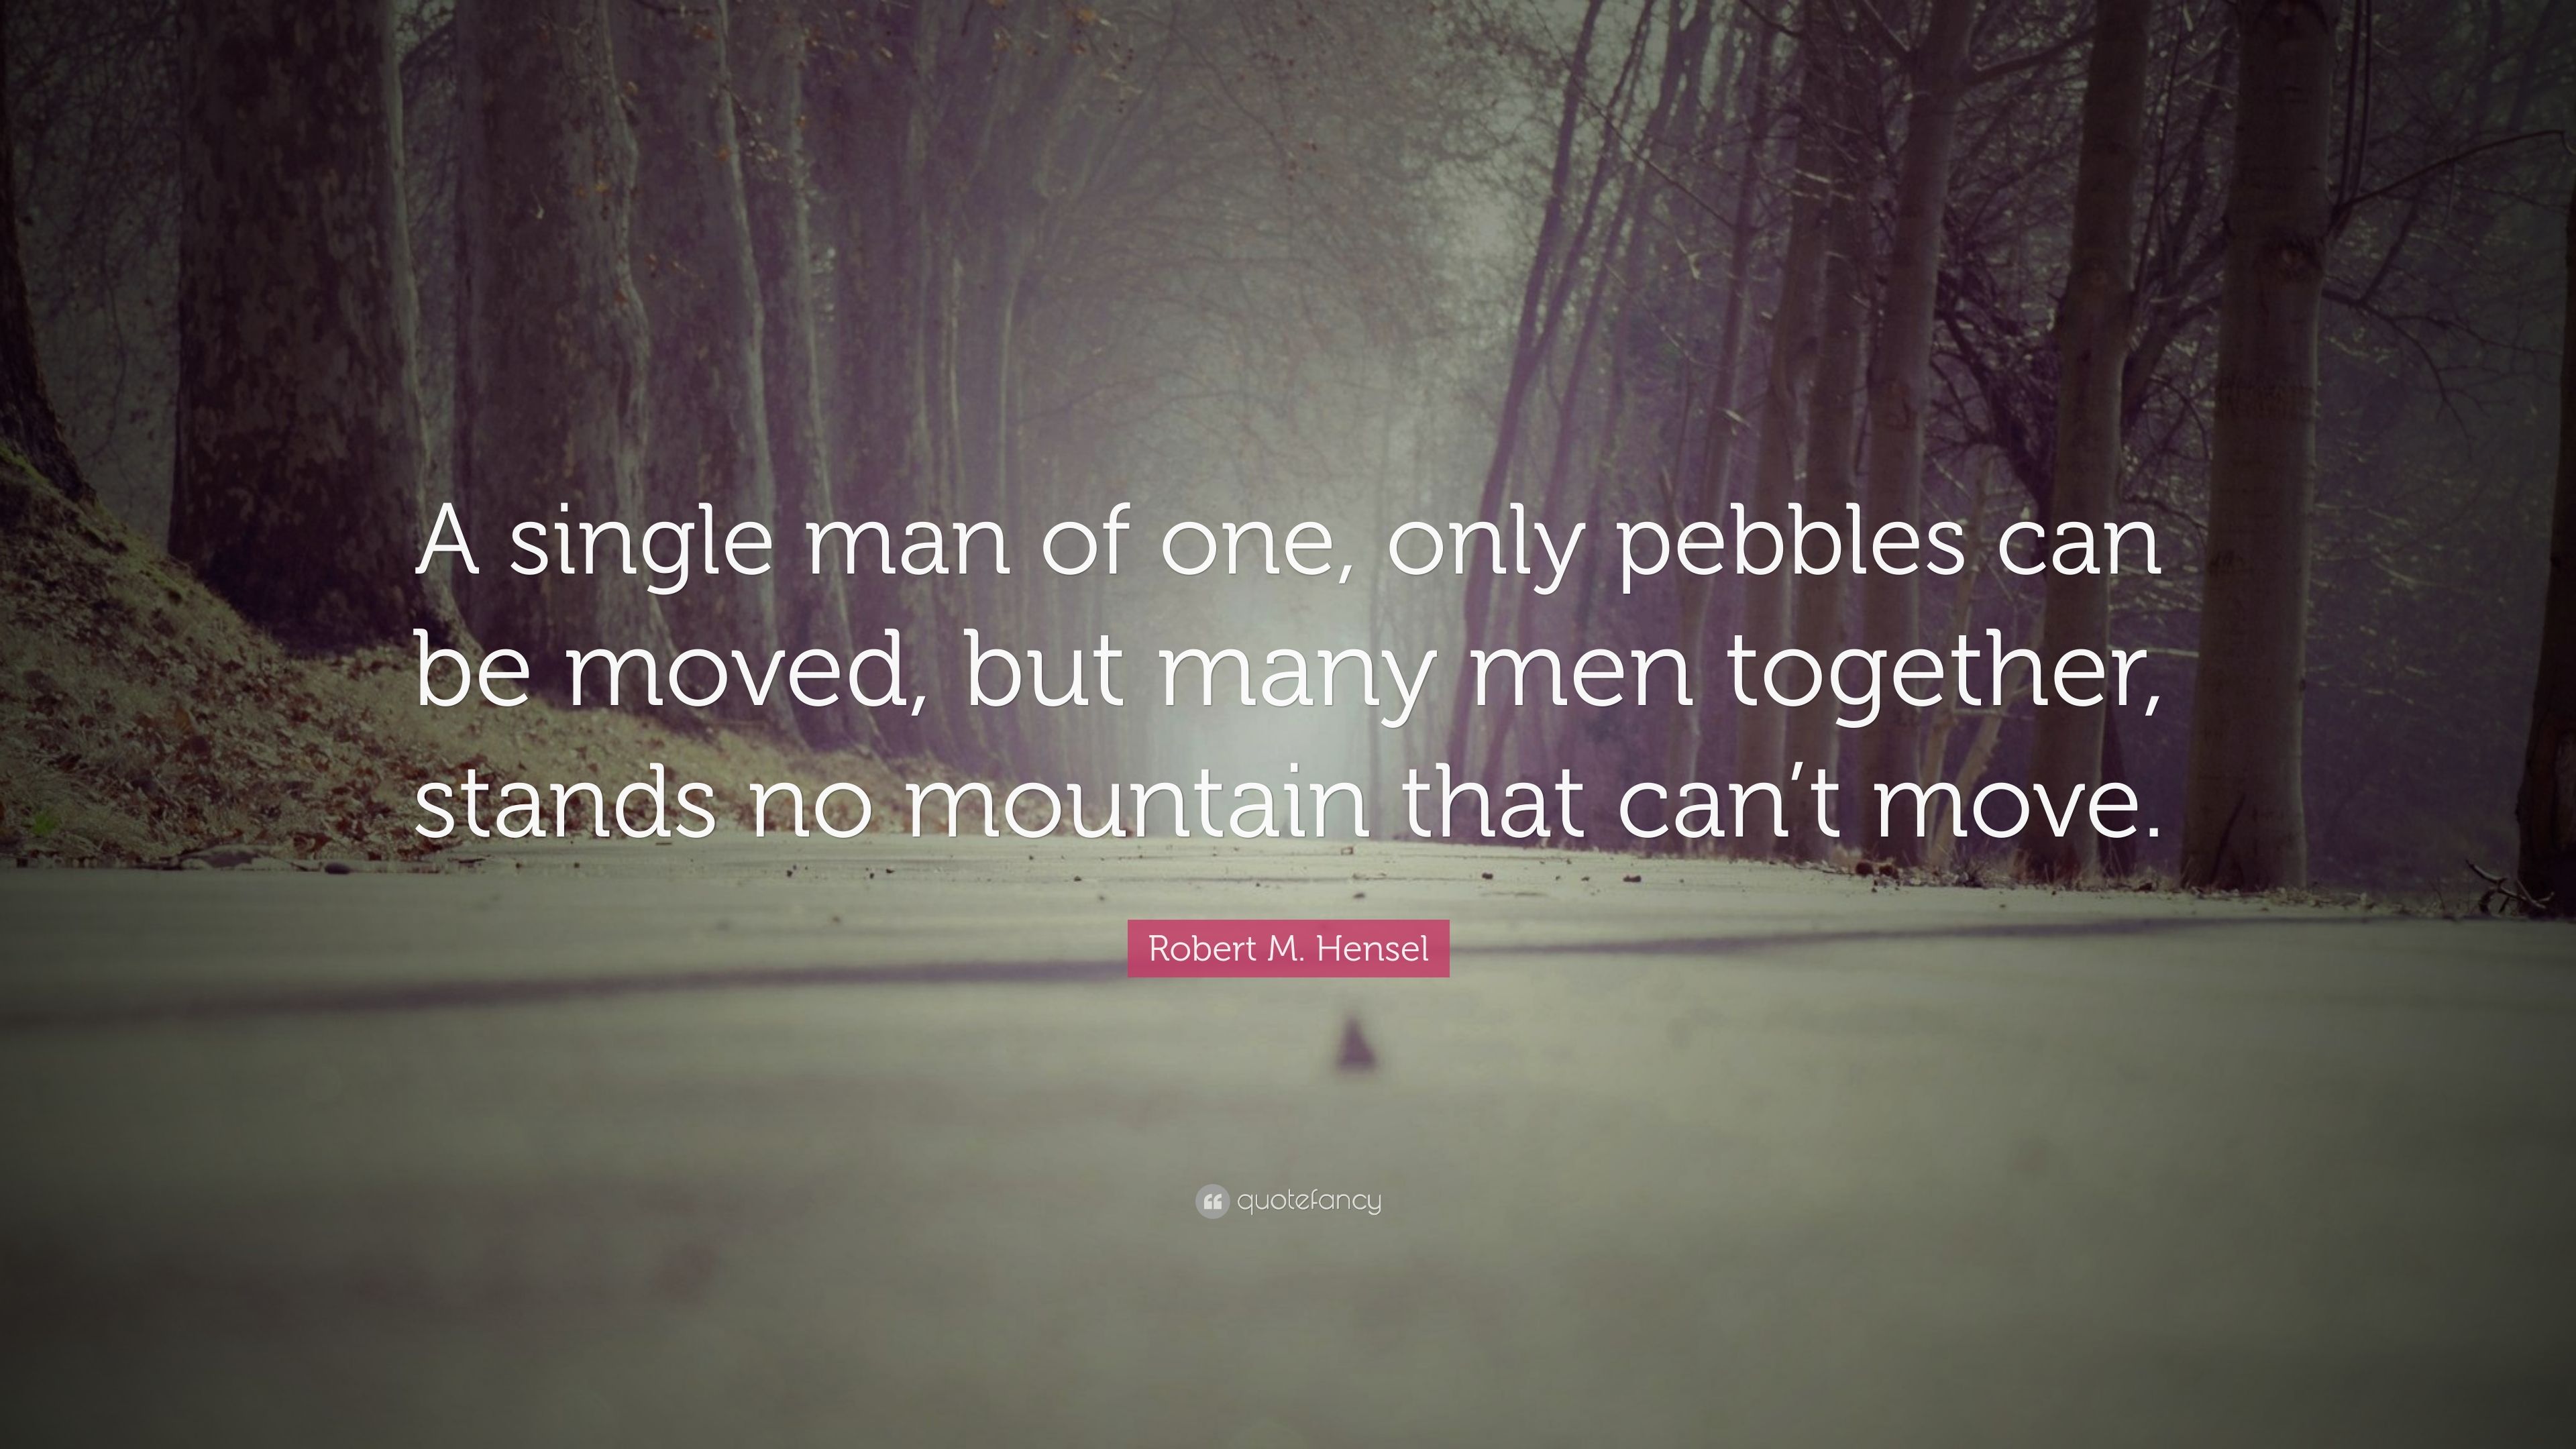 Robert M. Hensel Quote: “A single man of one, only pebbles can be